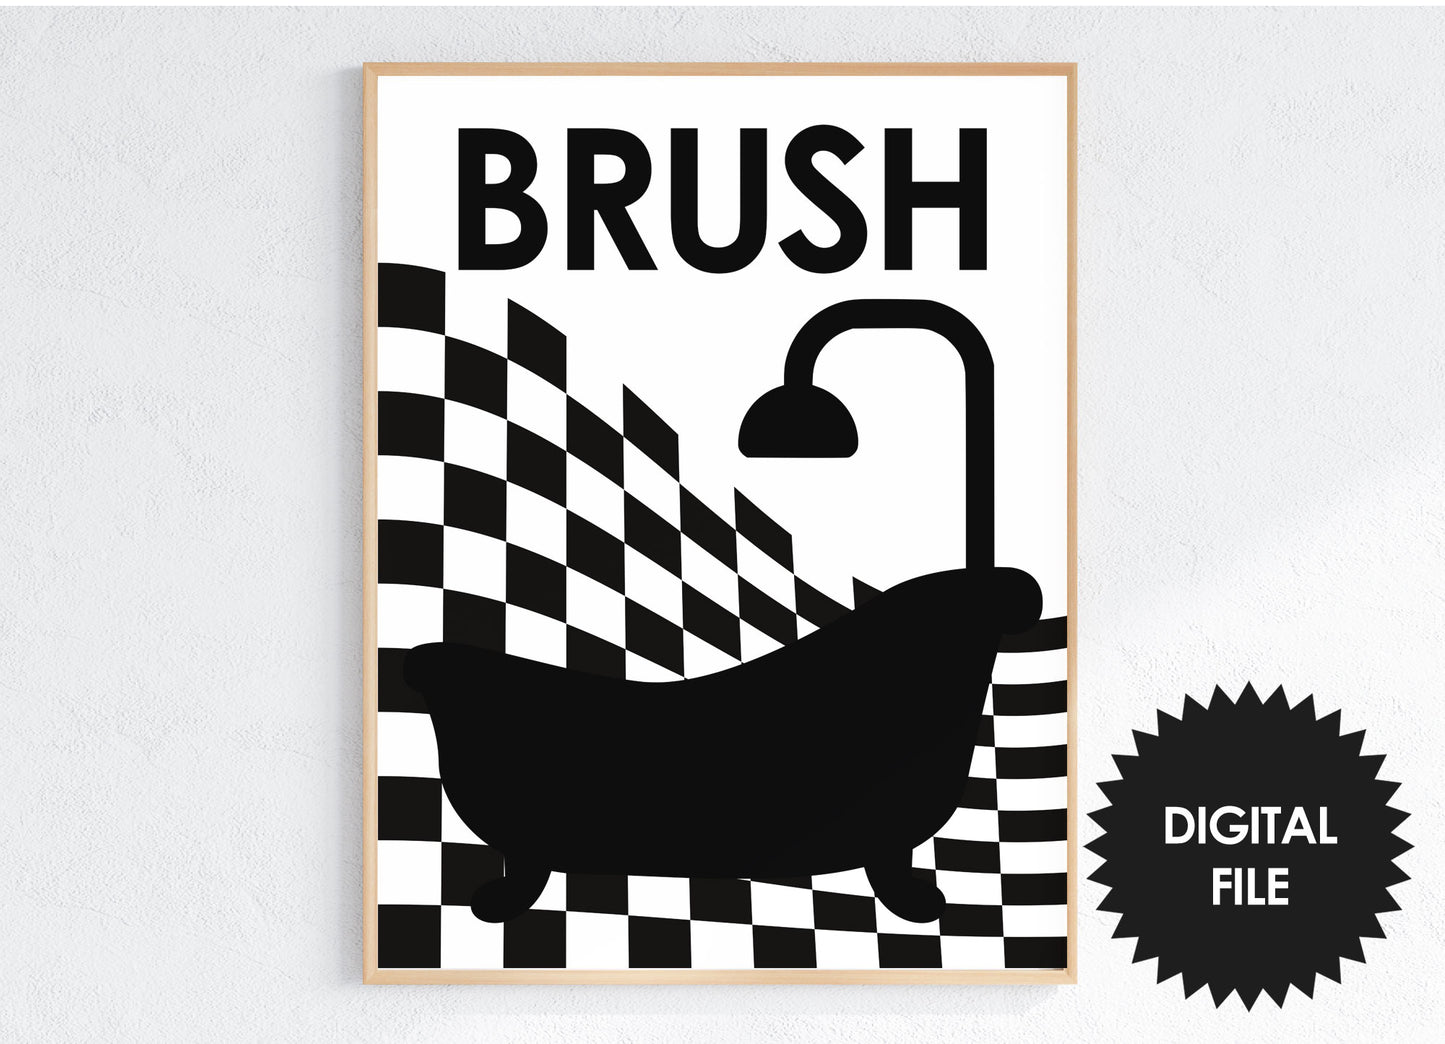 Bathroom Wall Art Set of 3, Flush the Toilet Sign Print, Black & White 17x22 In Posters, Instant Download Image